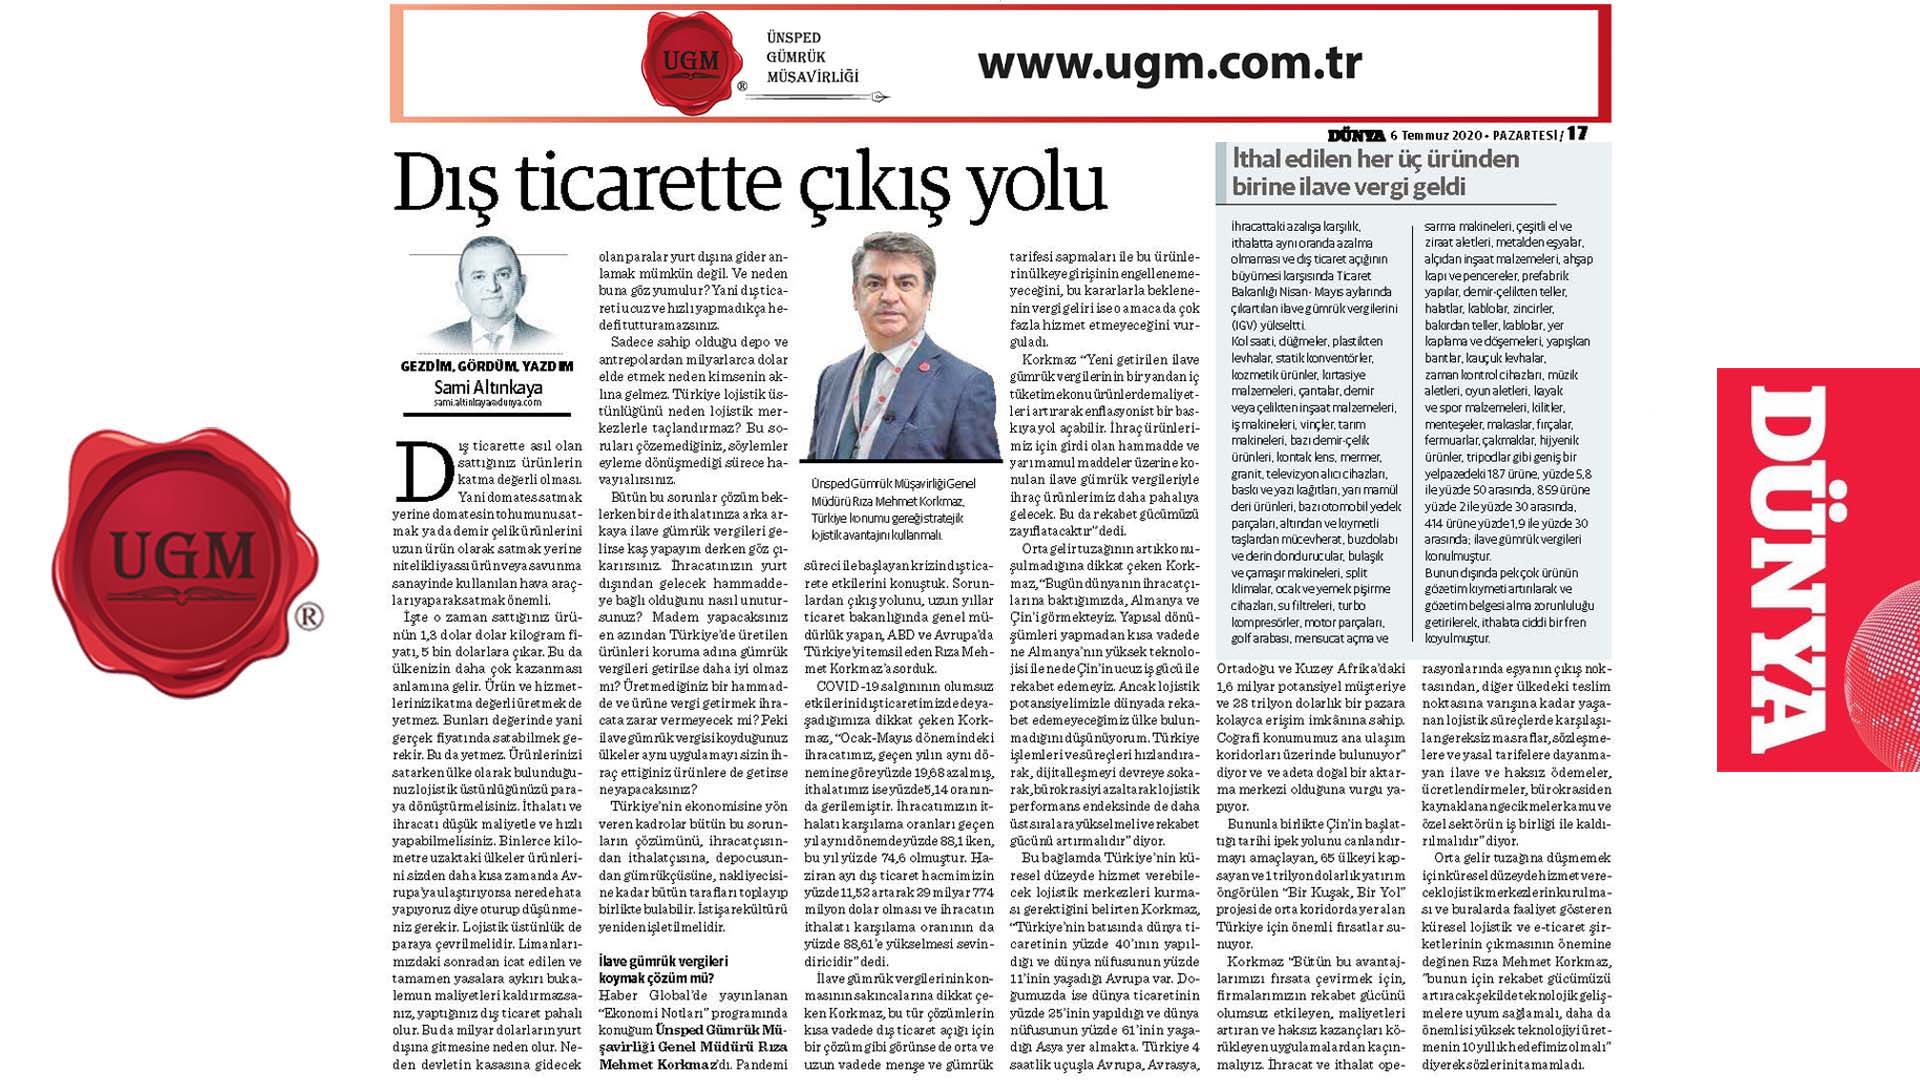 Our UGM Corporate Communications Director Sami Altınkaya's article entitled "Way our in foreign trade" was published in the Dünya newspaper on 06.07.2020.